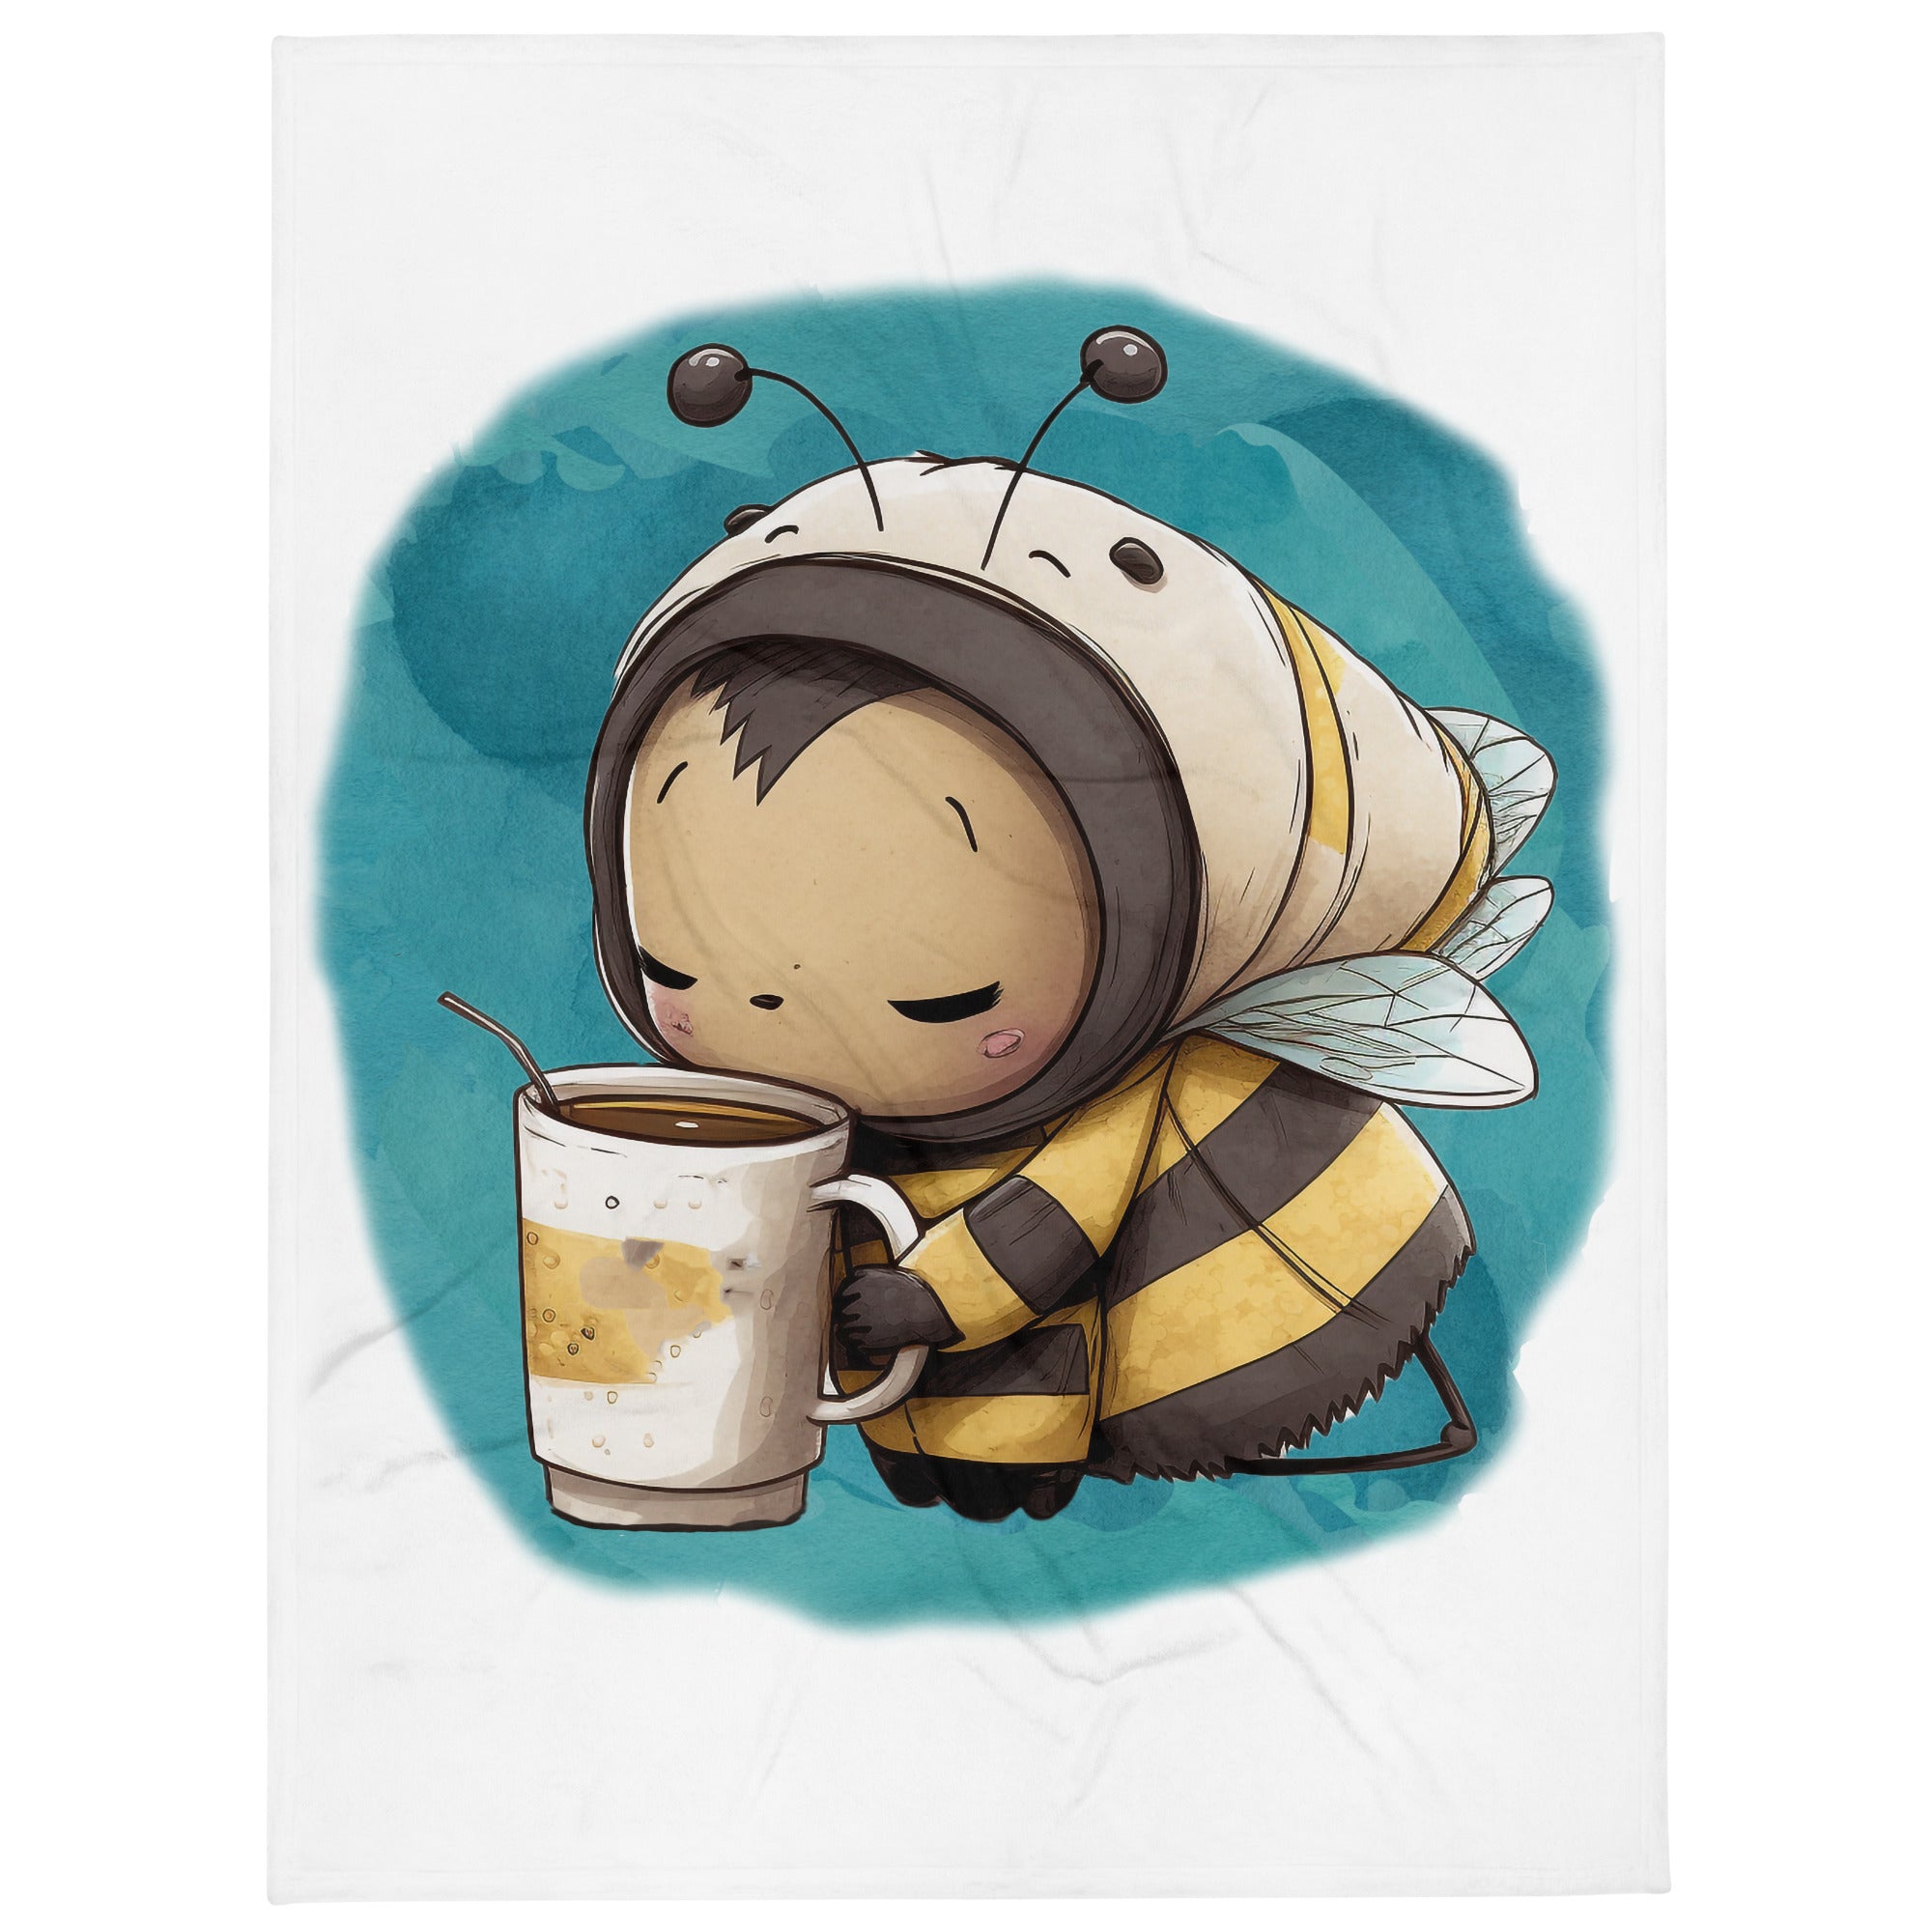 Sleepy bee 100% Polyester Soft Silk Touch Fabric Throw Blanket - Cozy, Durable and Adorable